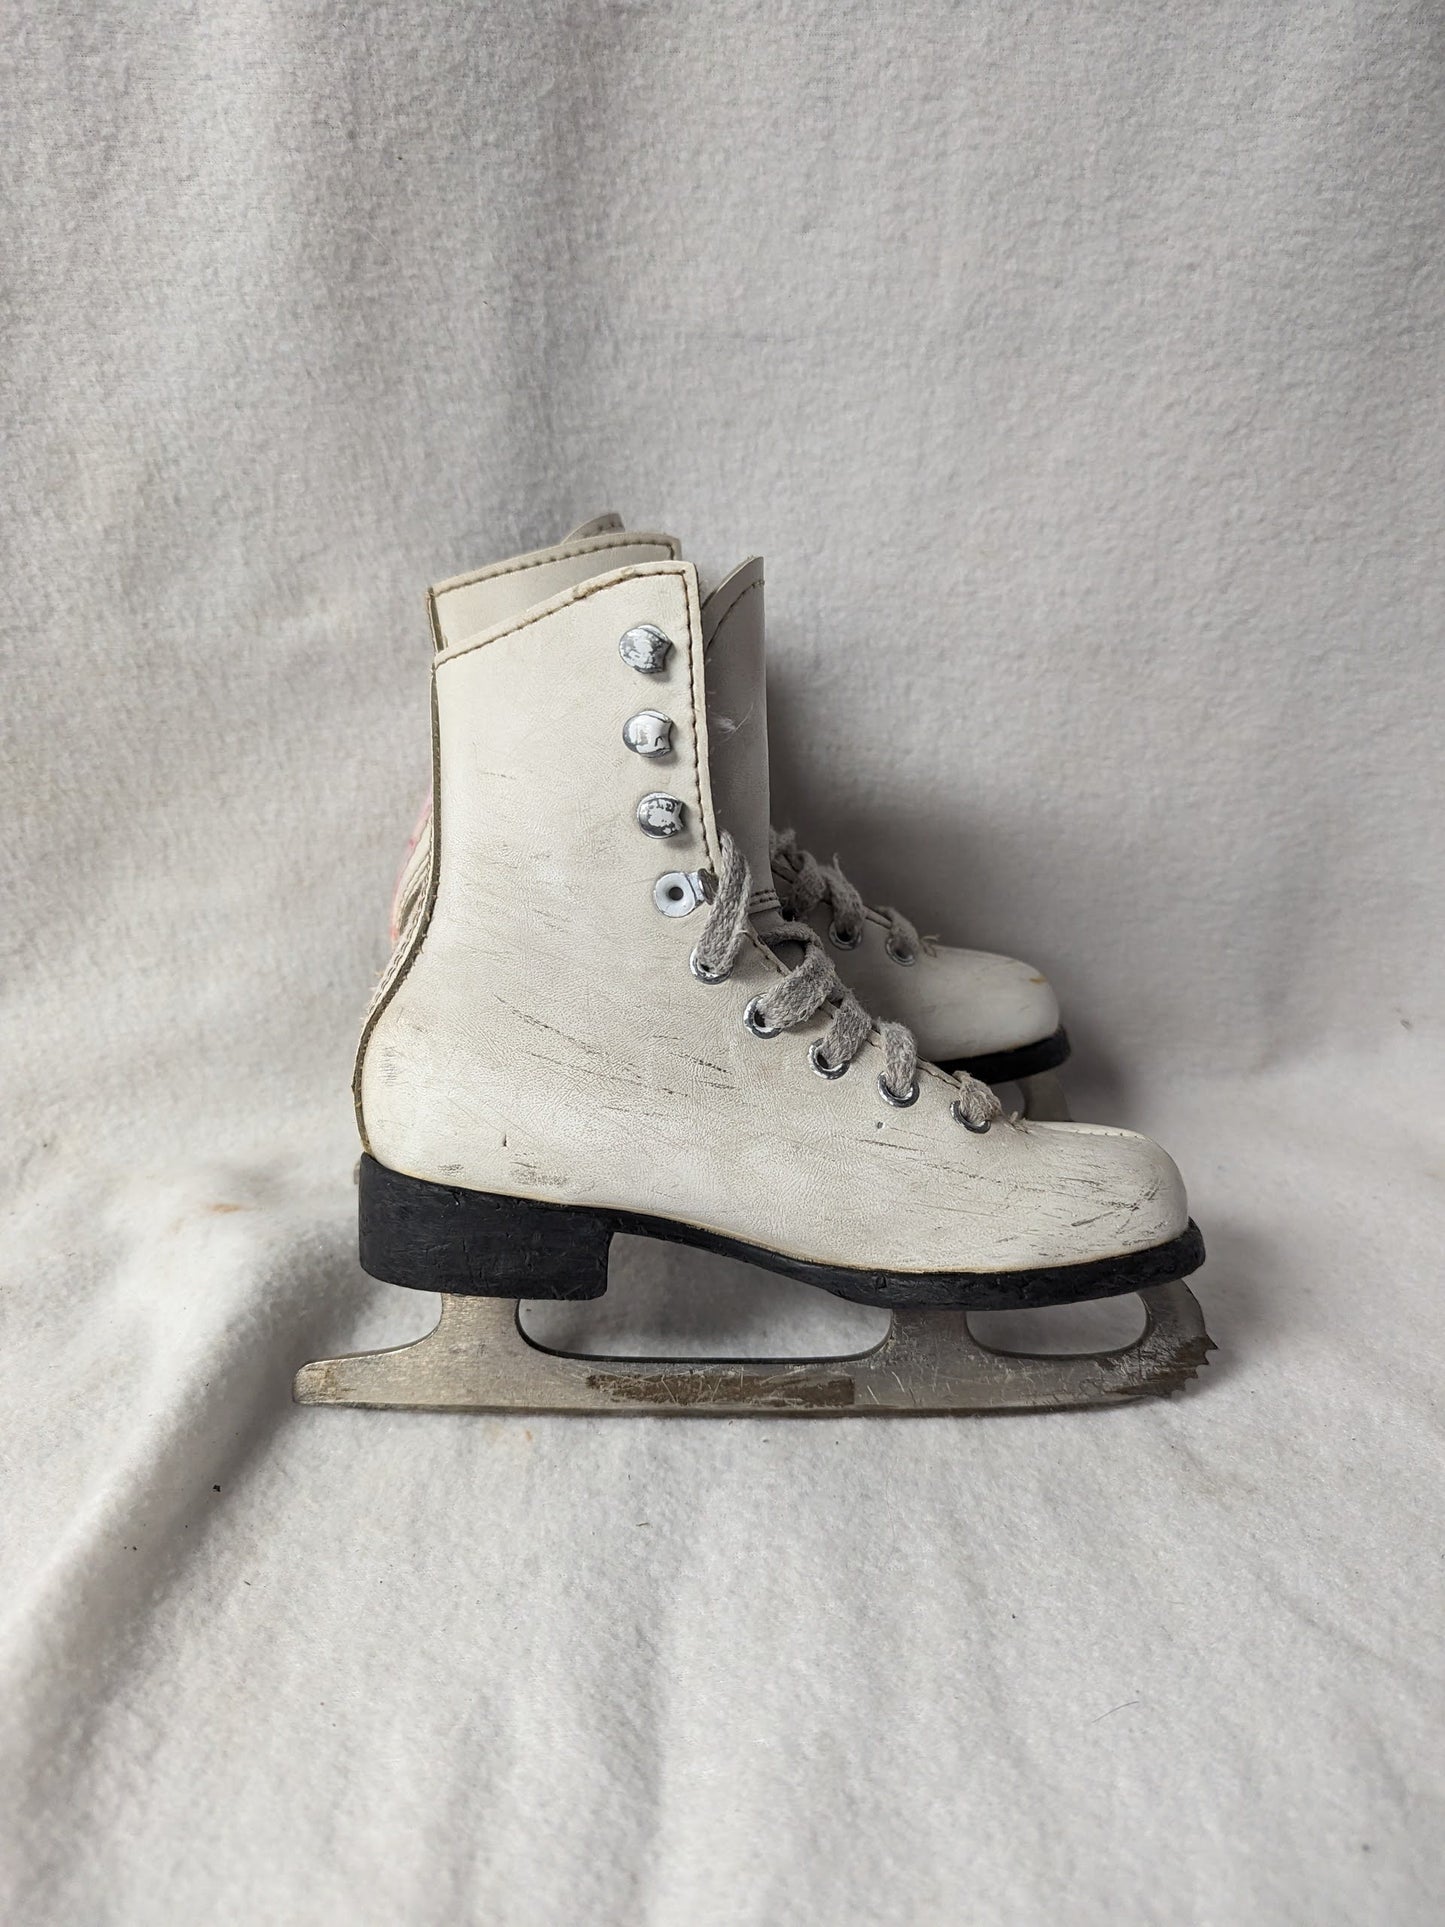 Lake Placid Figure Ice Skates Size Youth 10 Color White Condition Used